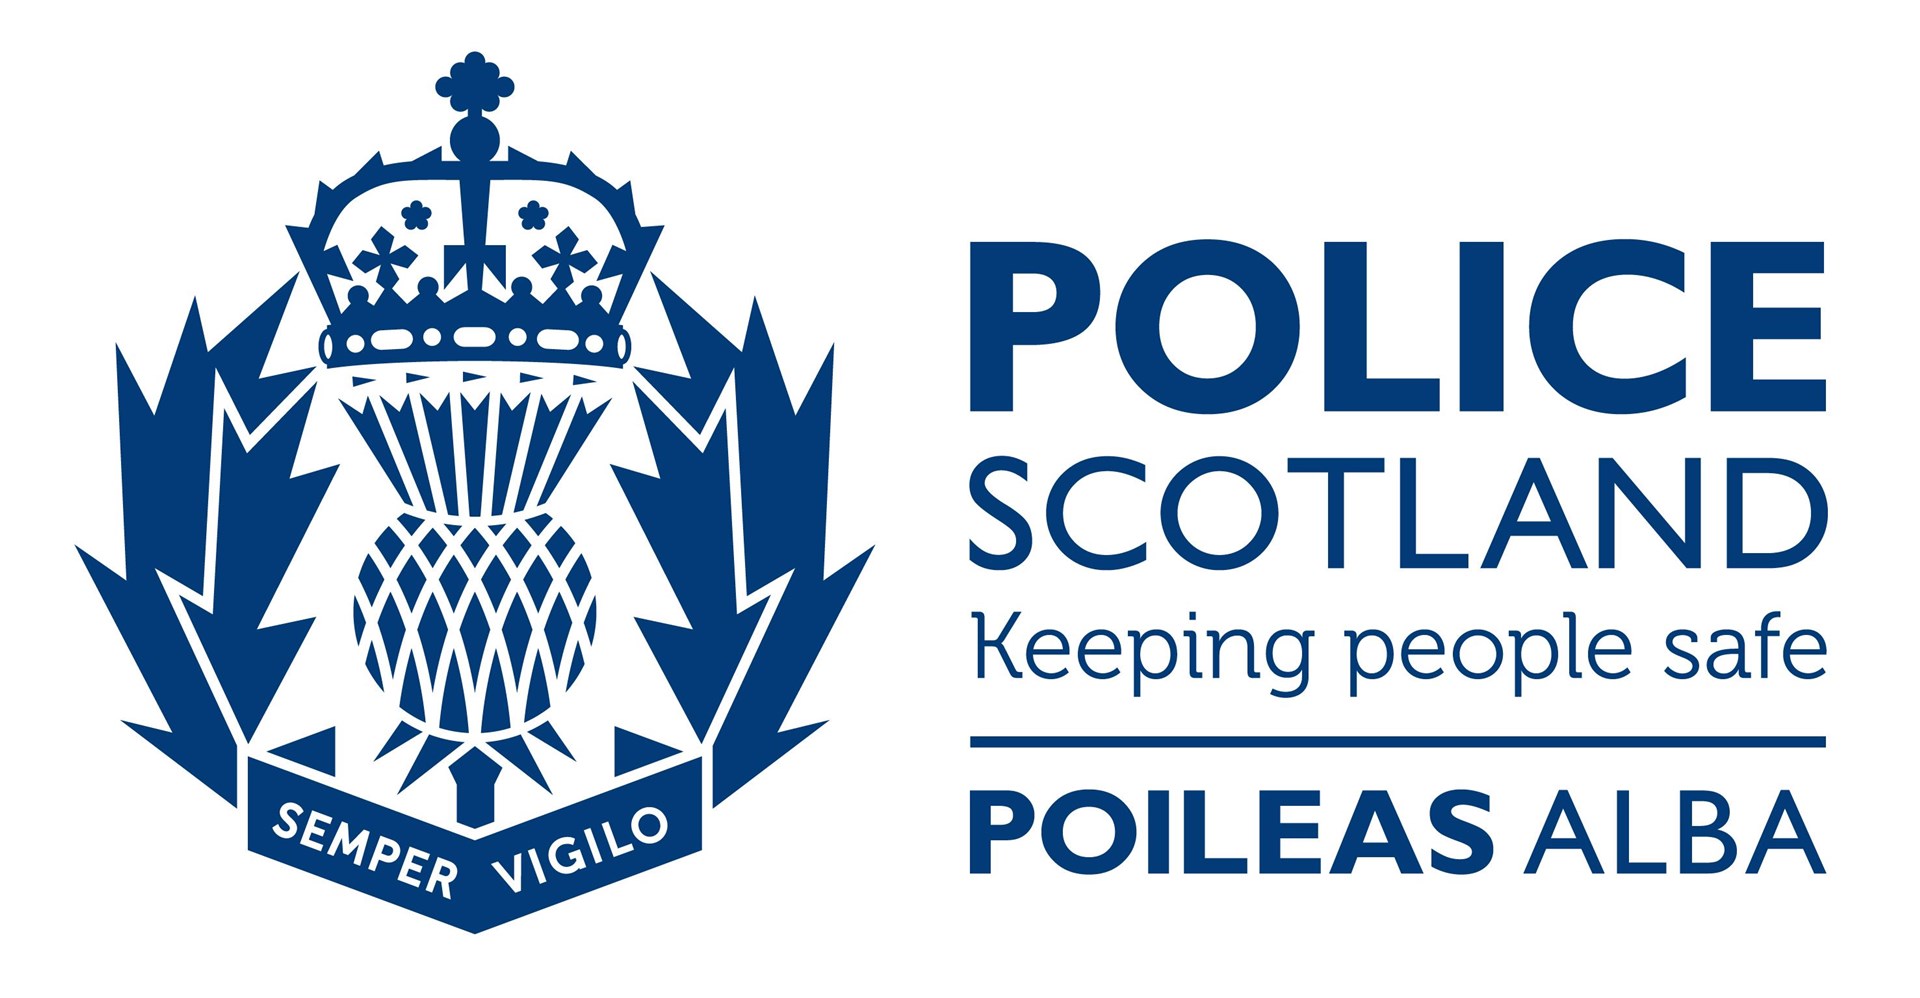 Police Scotland is committed to disrupting the illicit supply of drugs in our communities.